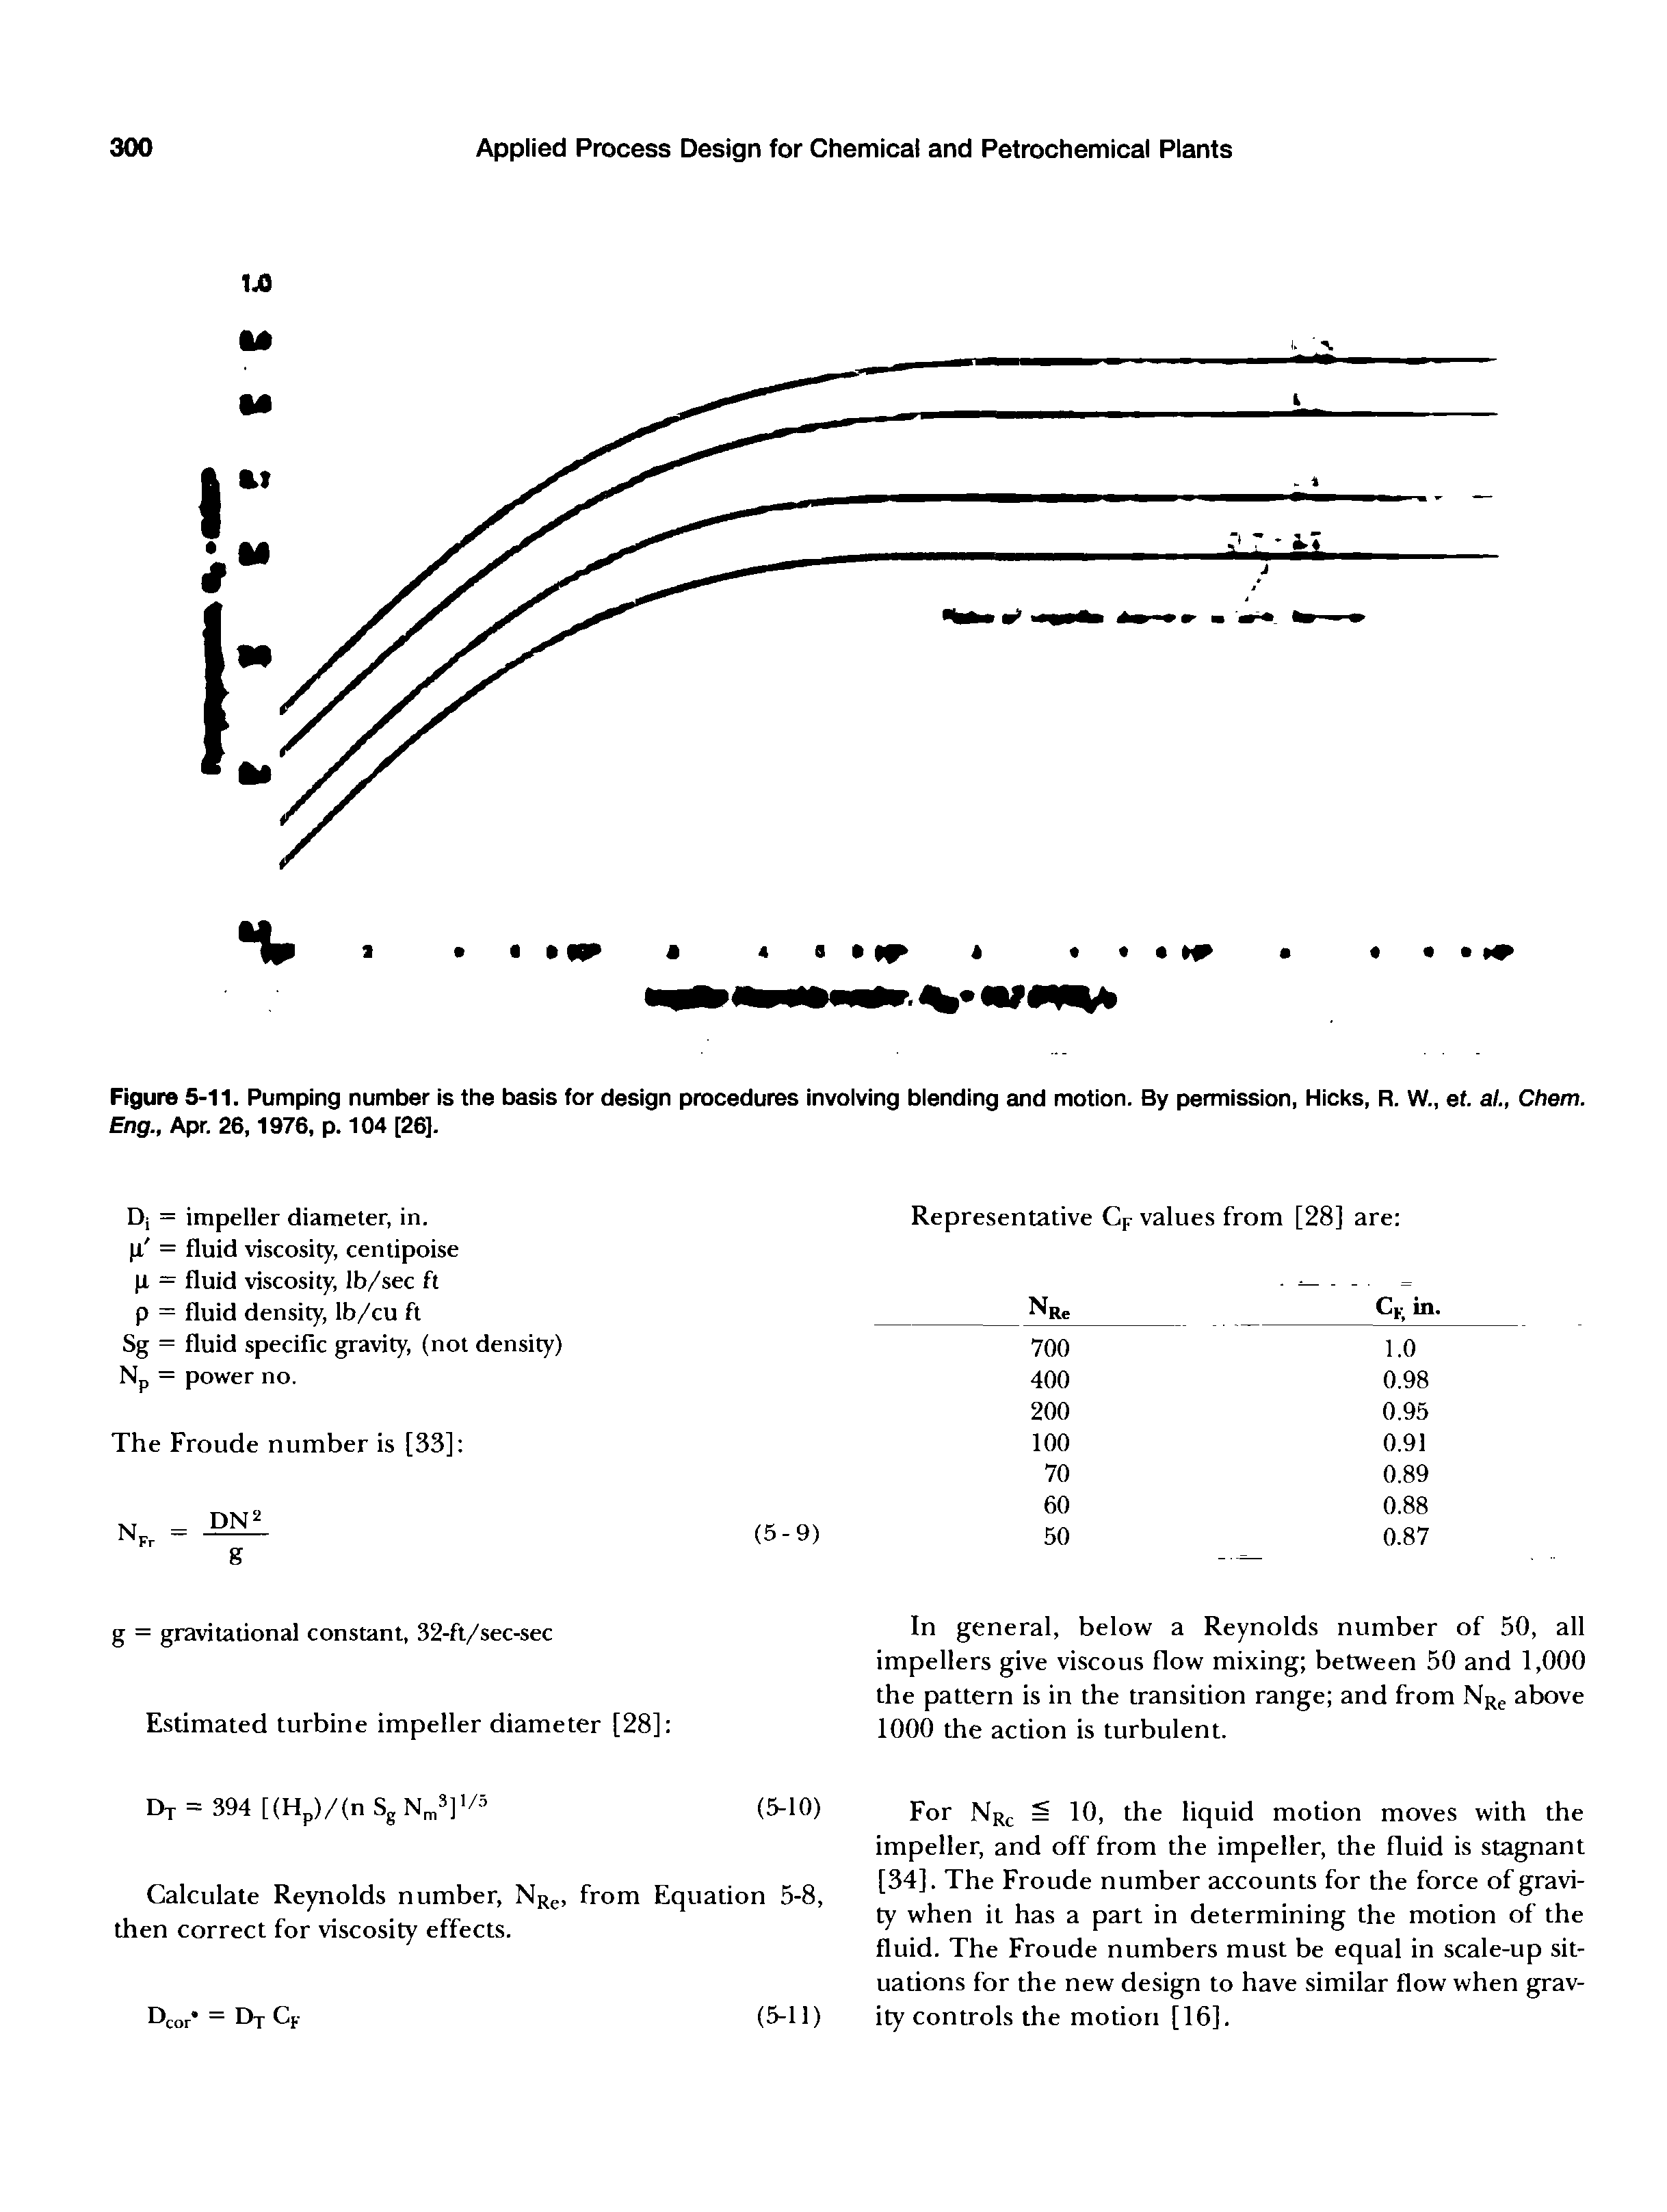 Figure 5-11. Pumping number is the basis for design procedures involving blending and motion. By permission, Hicks, R. W., ef. a/., Chem. Eng., Apr. 26,1976, p. 104 [26].